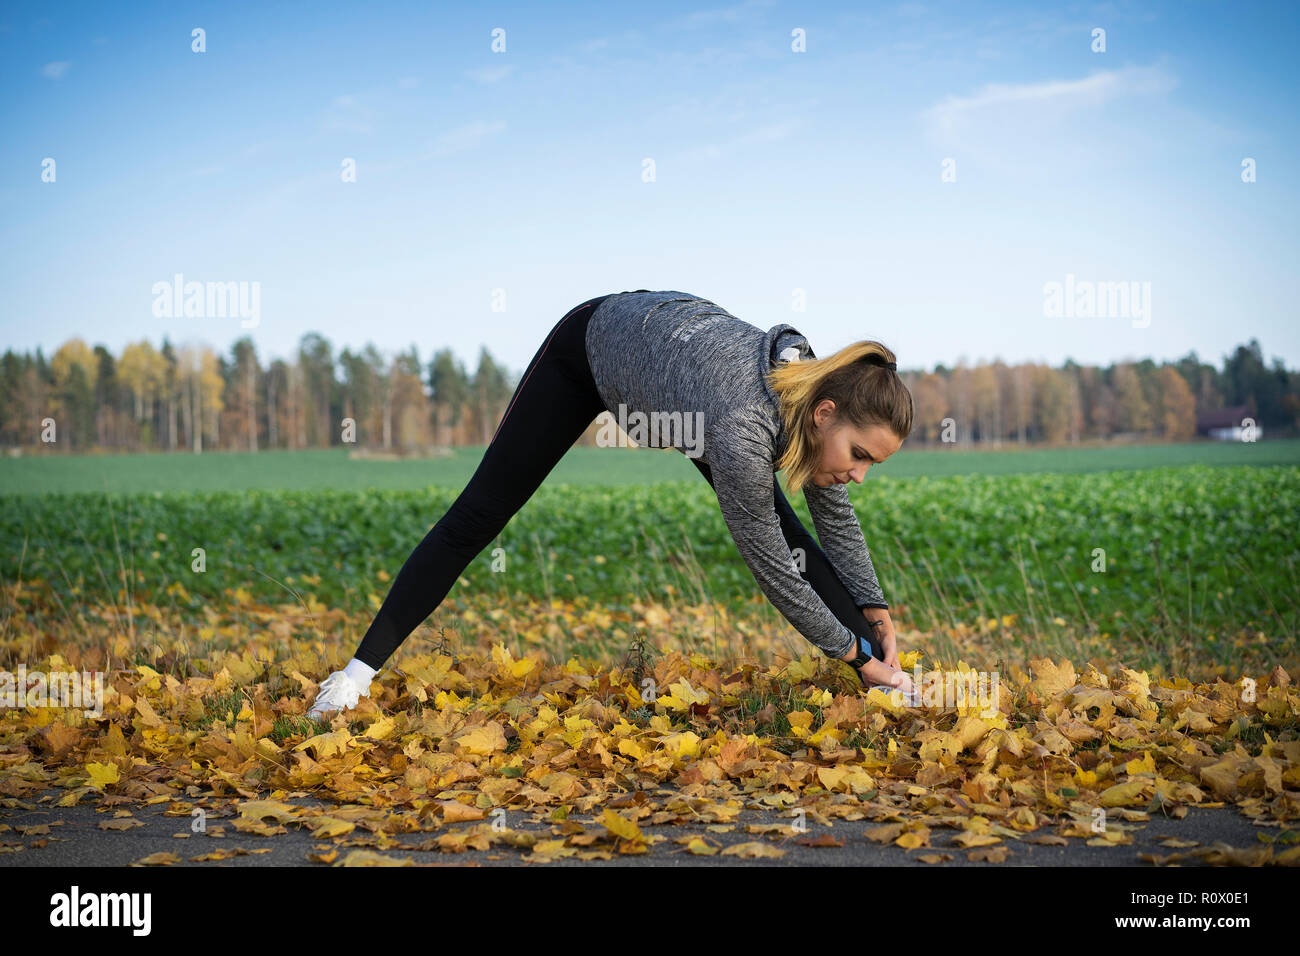 Blonde girl in yoga pants Blonde Girl Yoga Pants High Resolution Stock Photography And Images Alamy